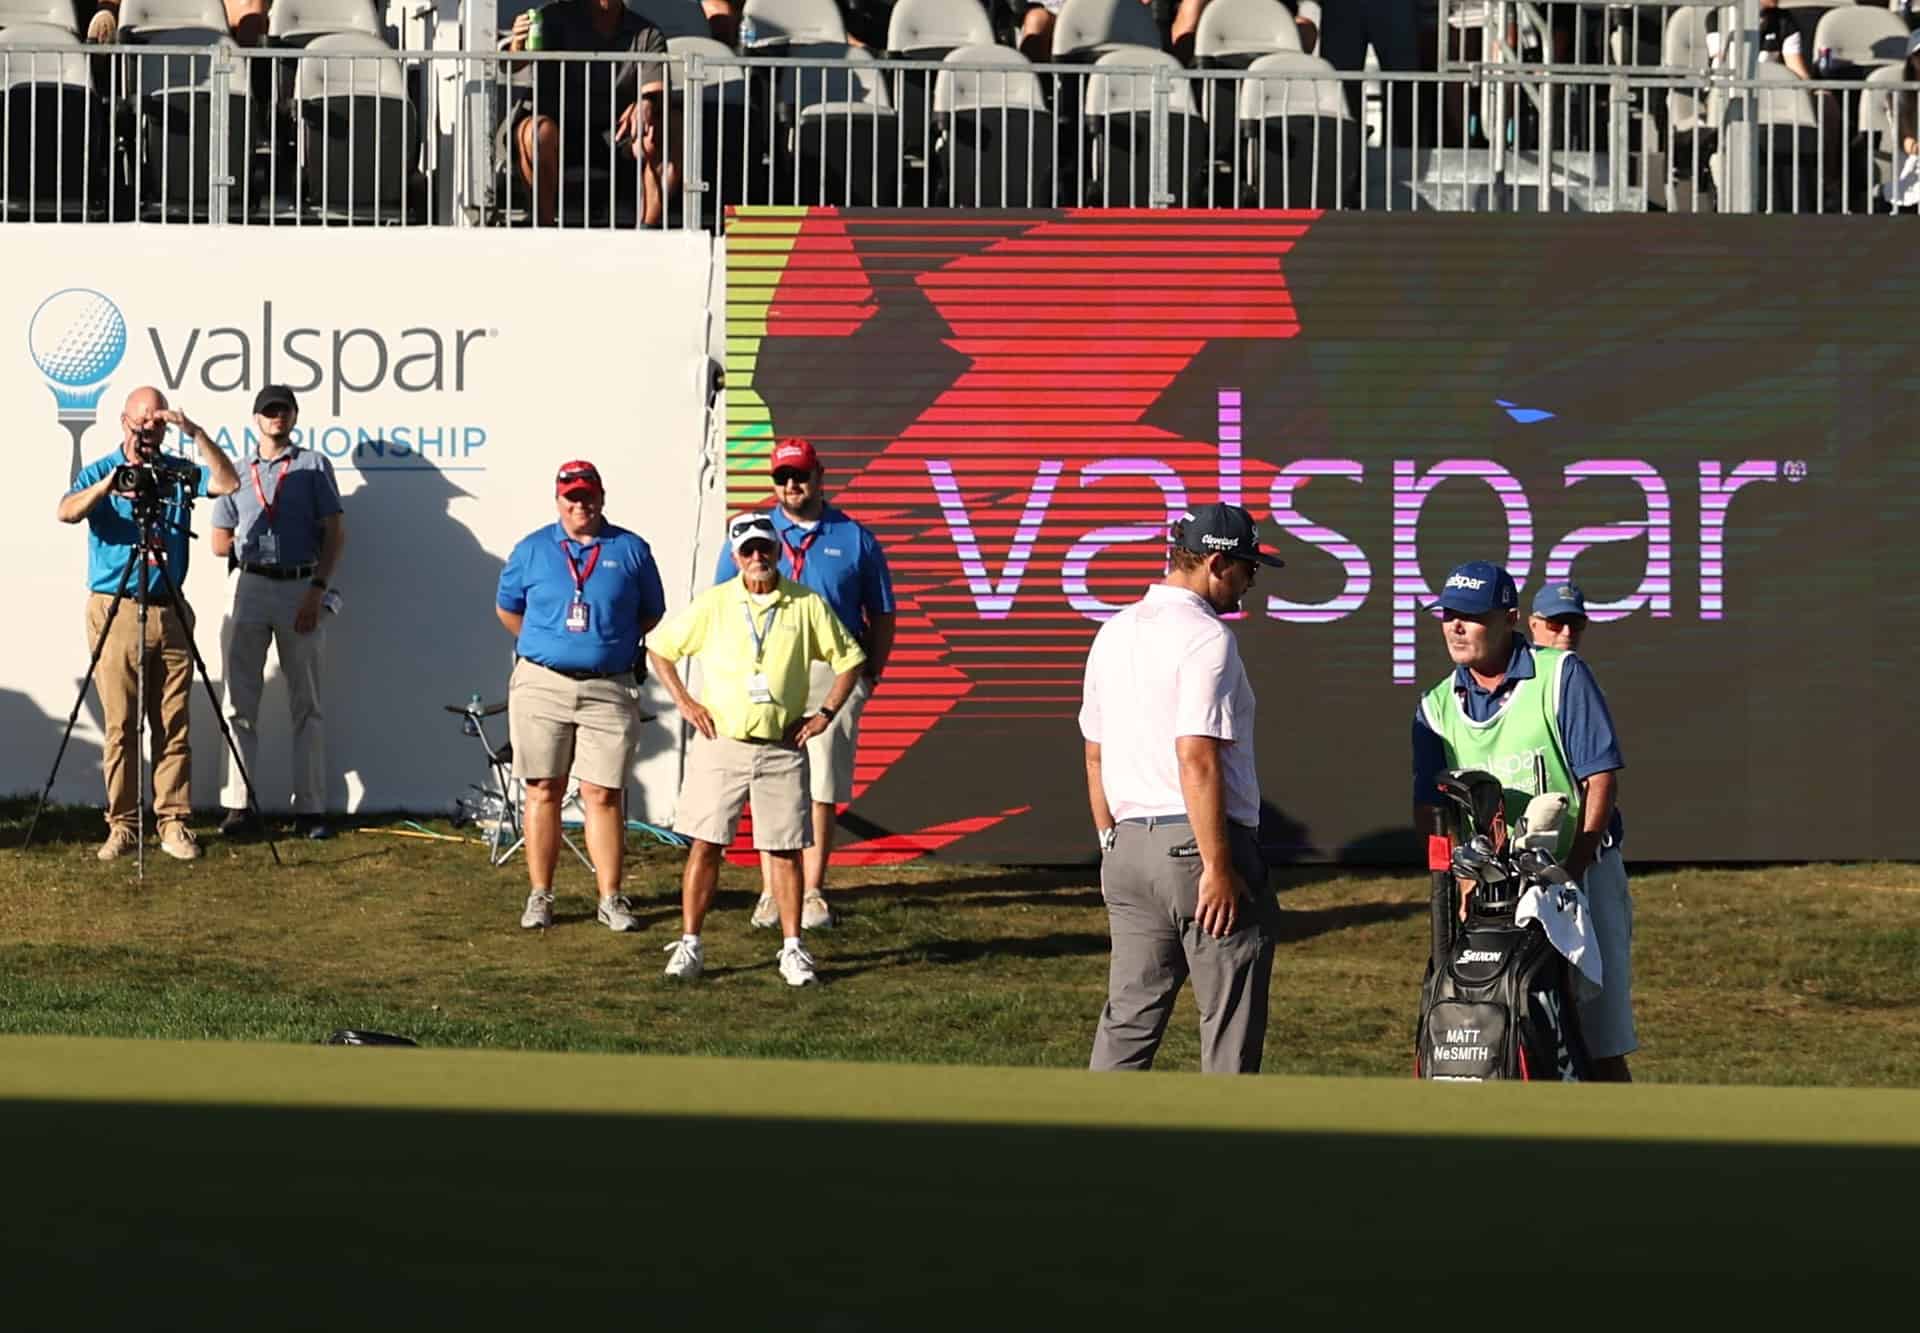 Valspar Championship prize money: How much will each player win?